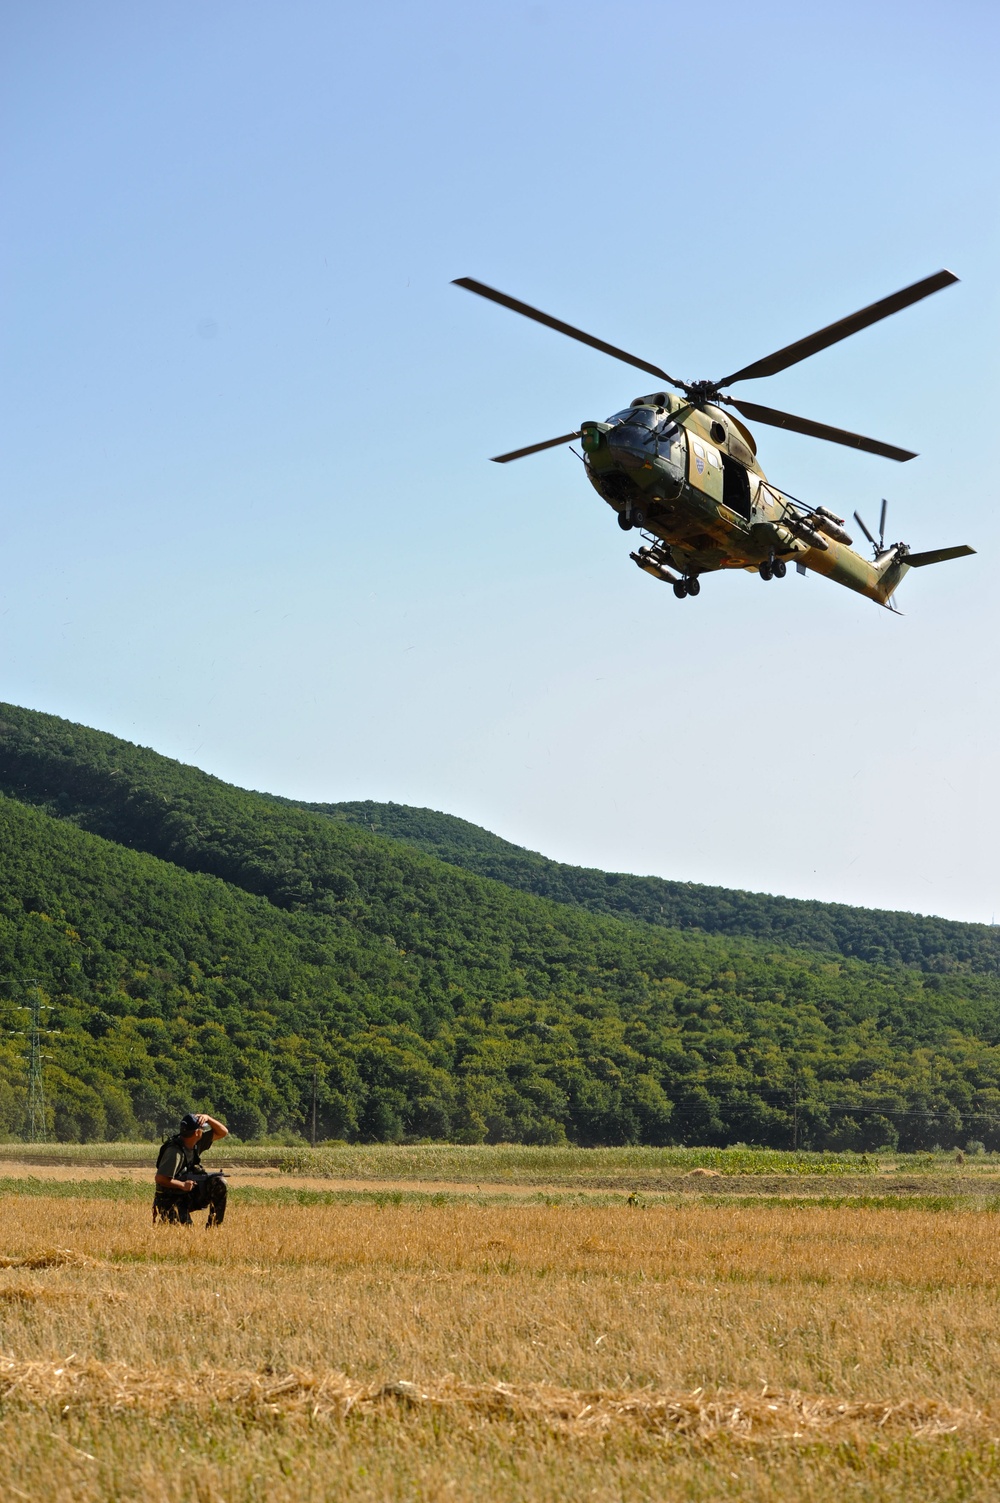 Forces train with partners in arms to enable CSAR readiness